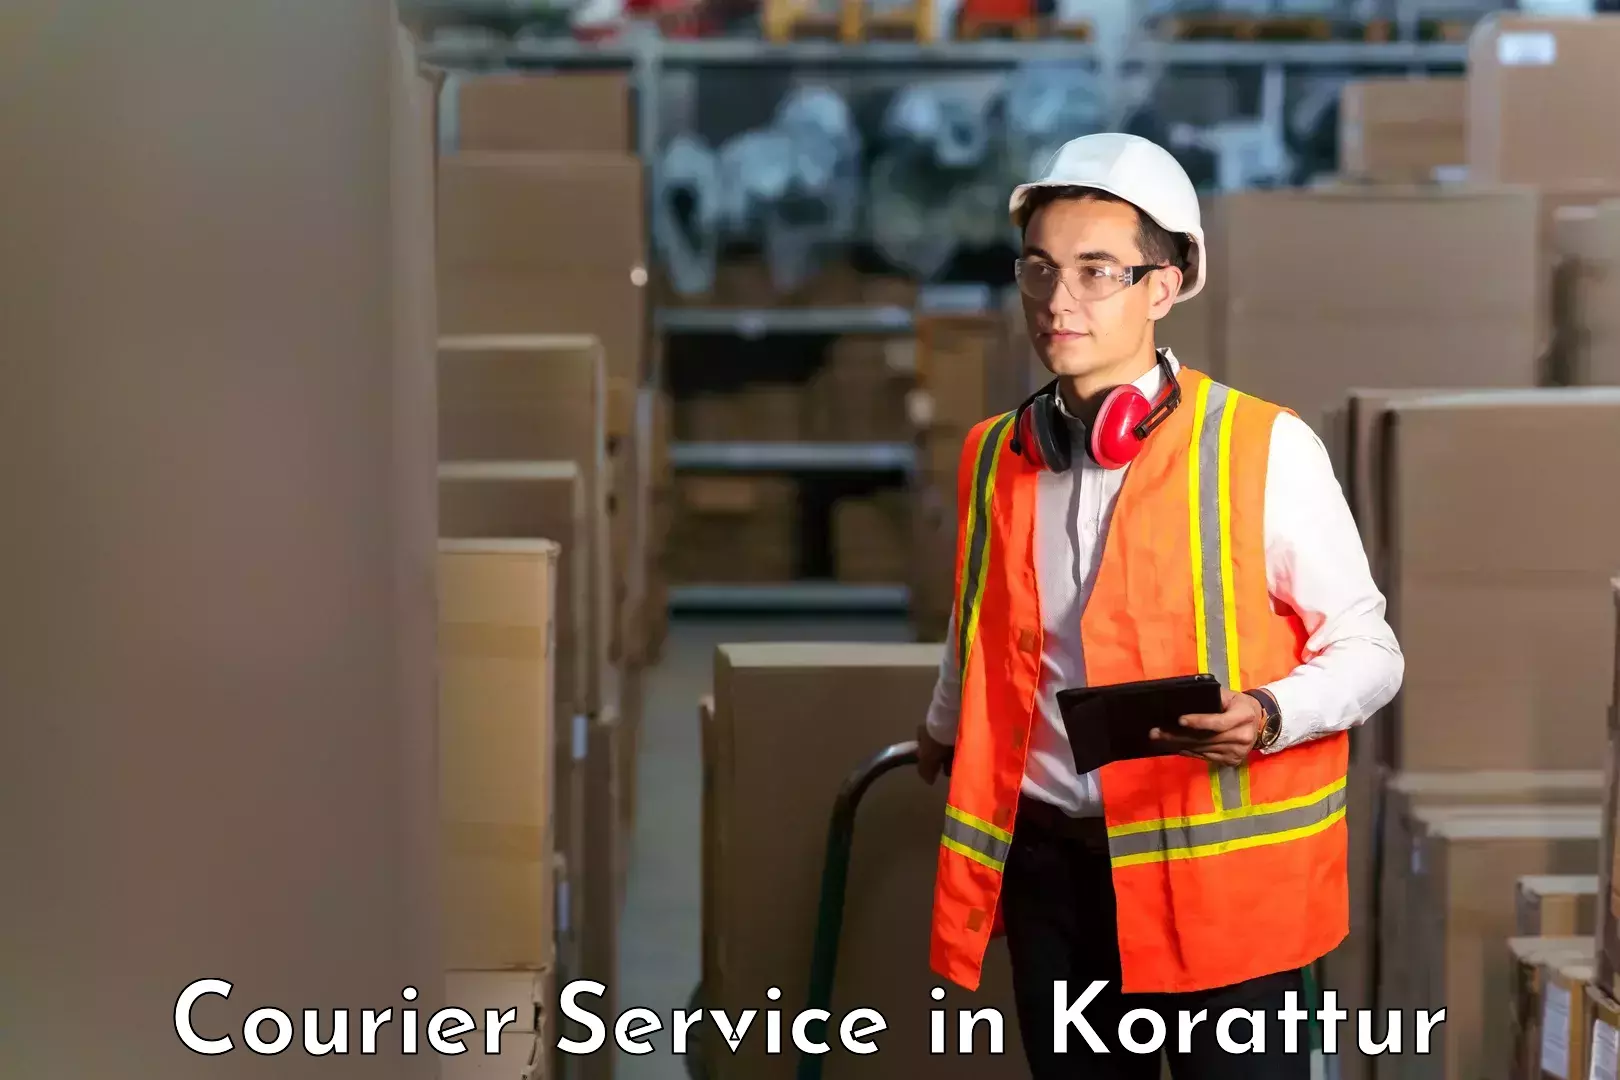 Overnight delivery services in Korattur